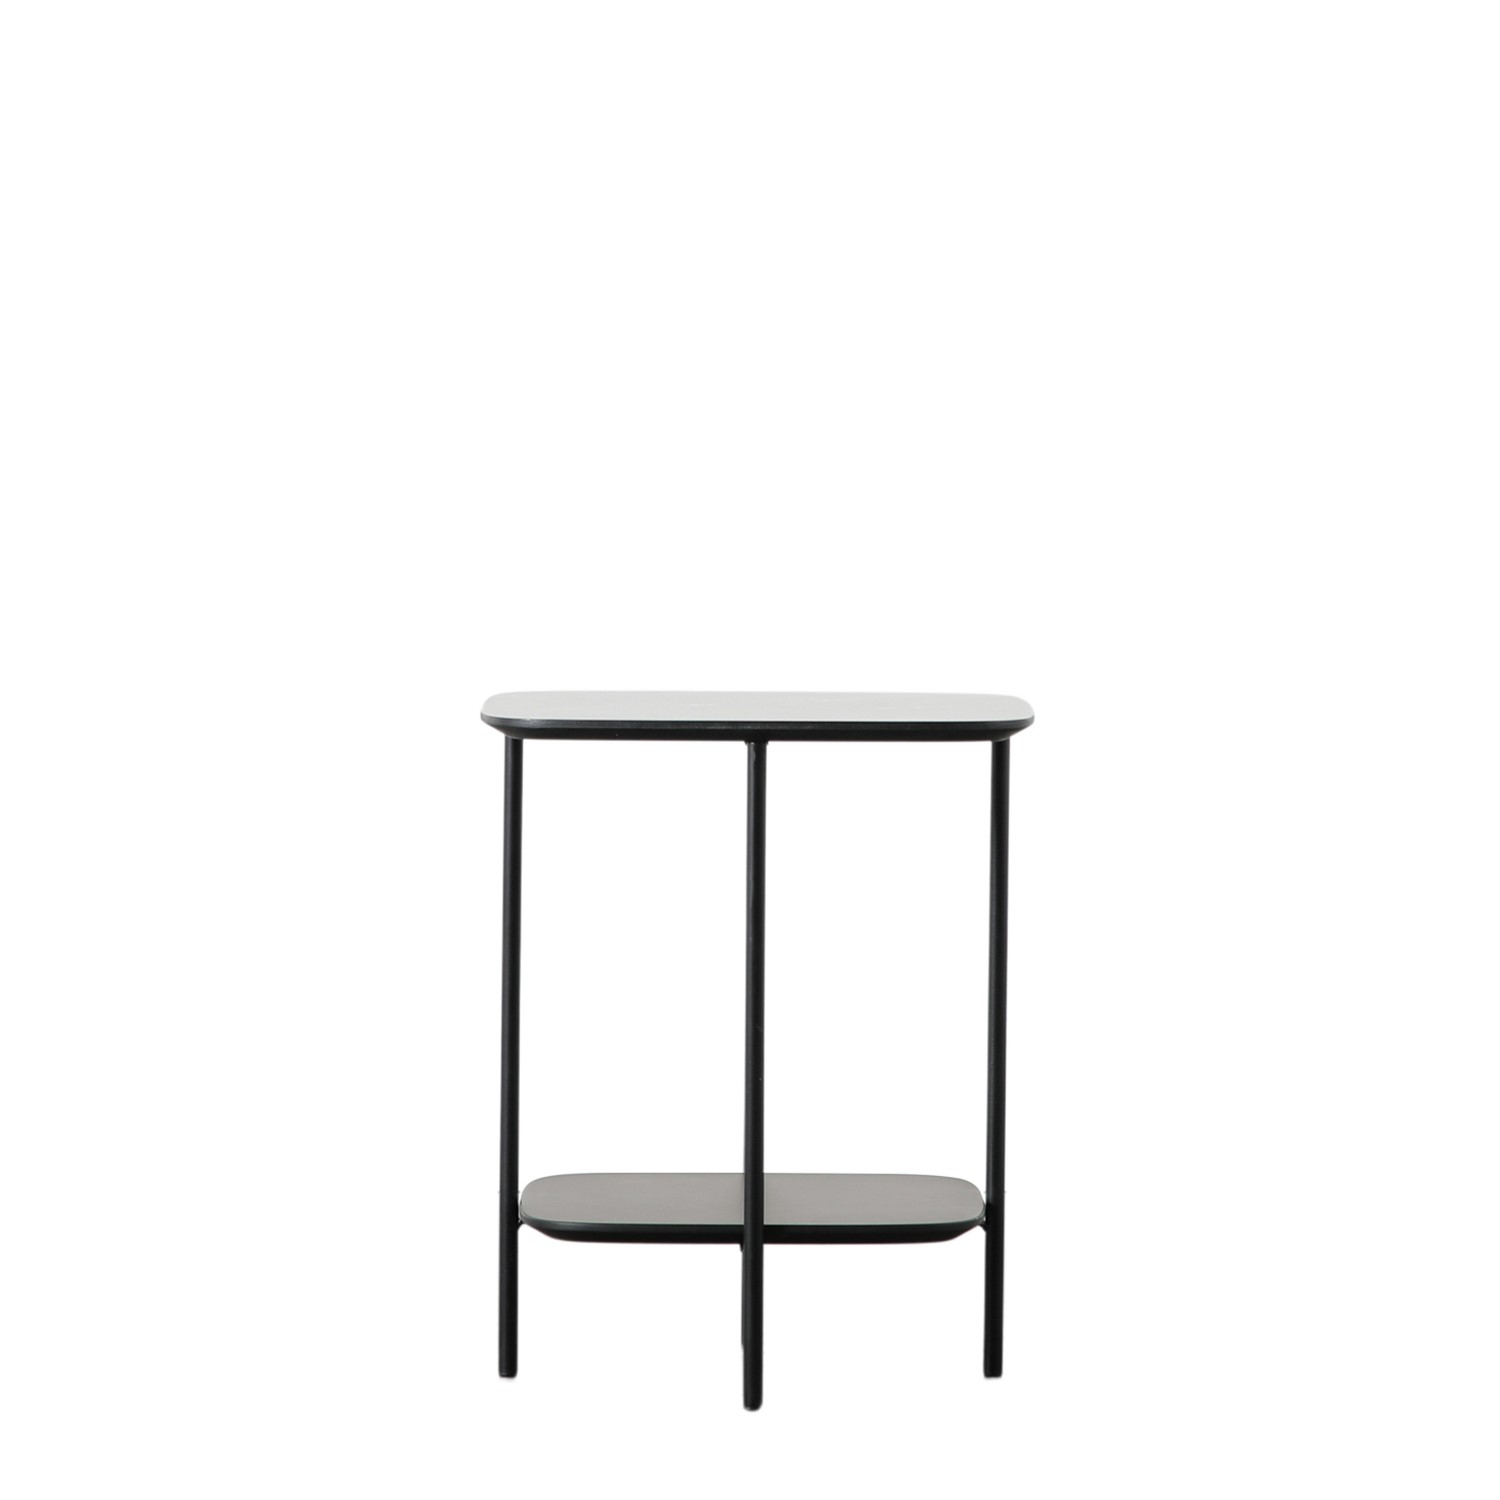 Read more about Ludworth side table black marble caspian house